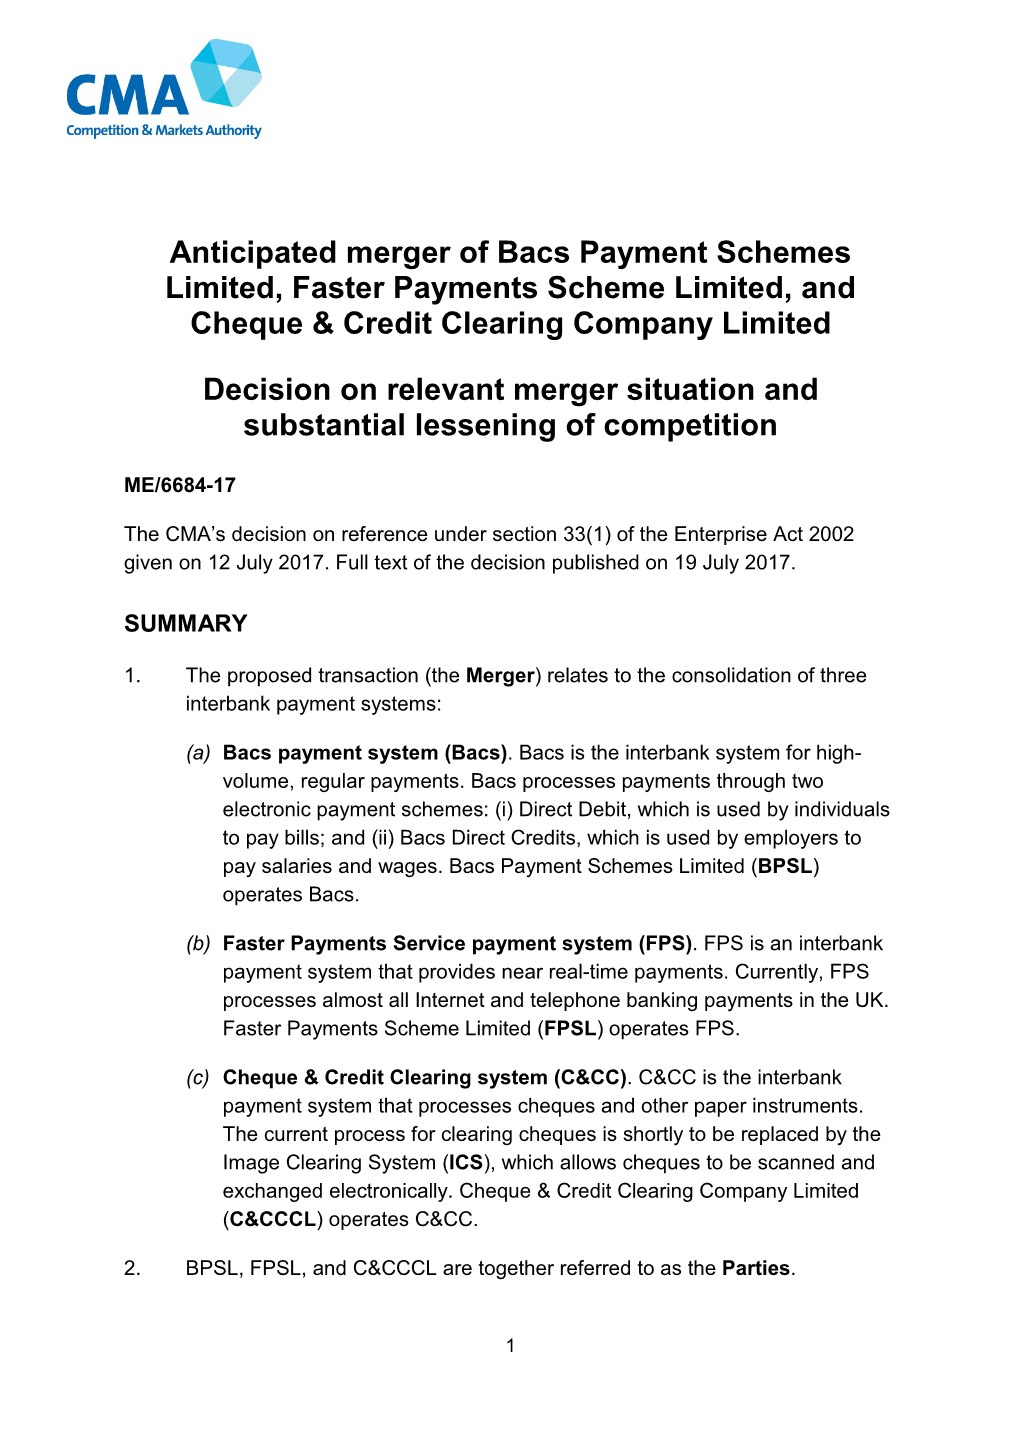 Anticipated Merger of Bacs Payment Schemes Limited, Faster Payments Scheme Limited, and Cheque & Credit Clearing Company Limited